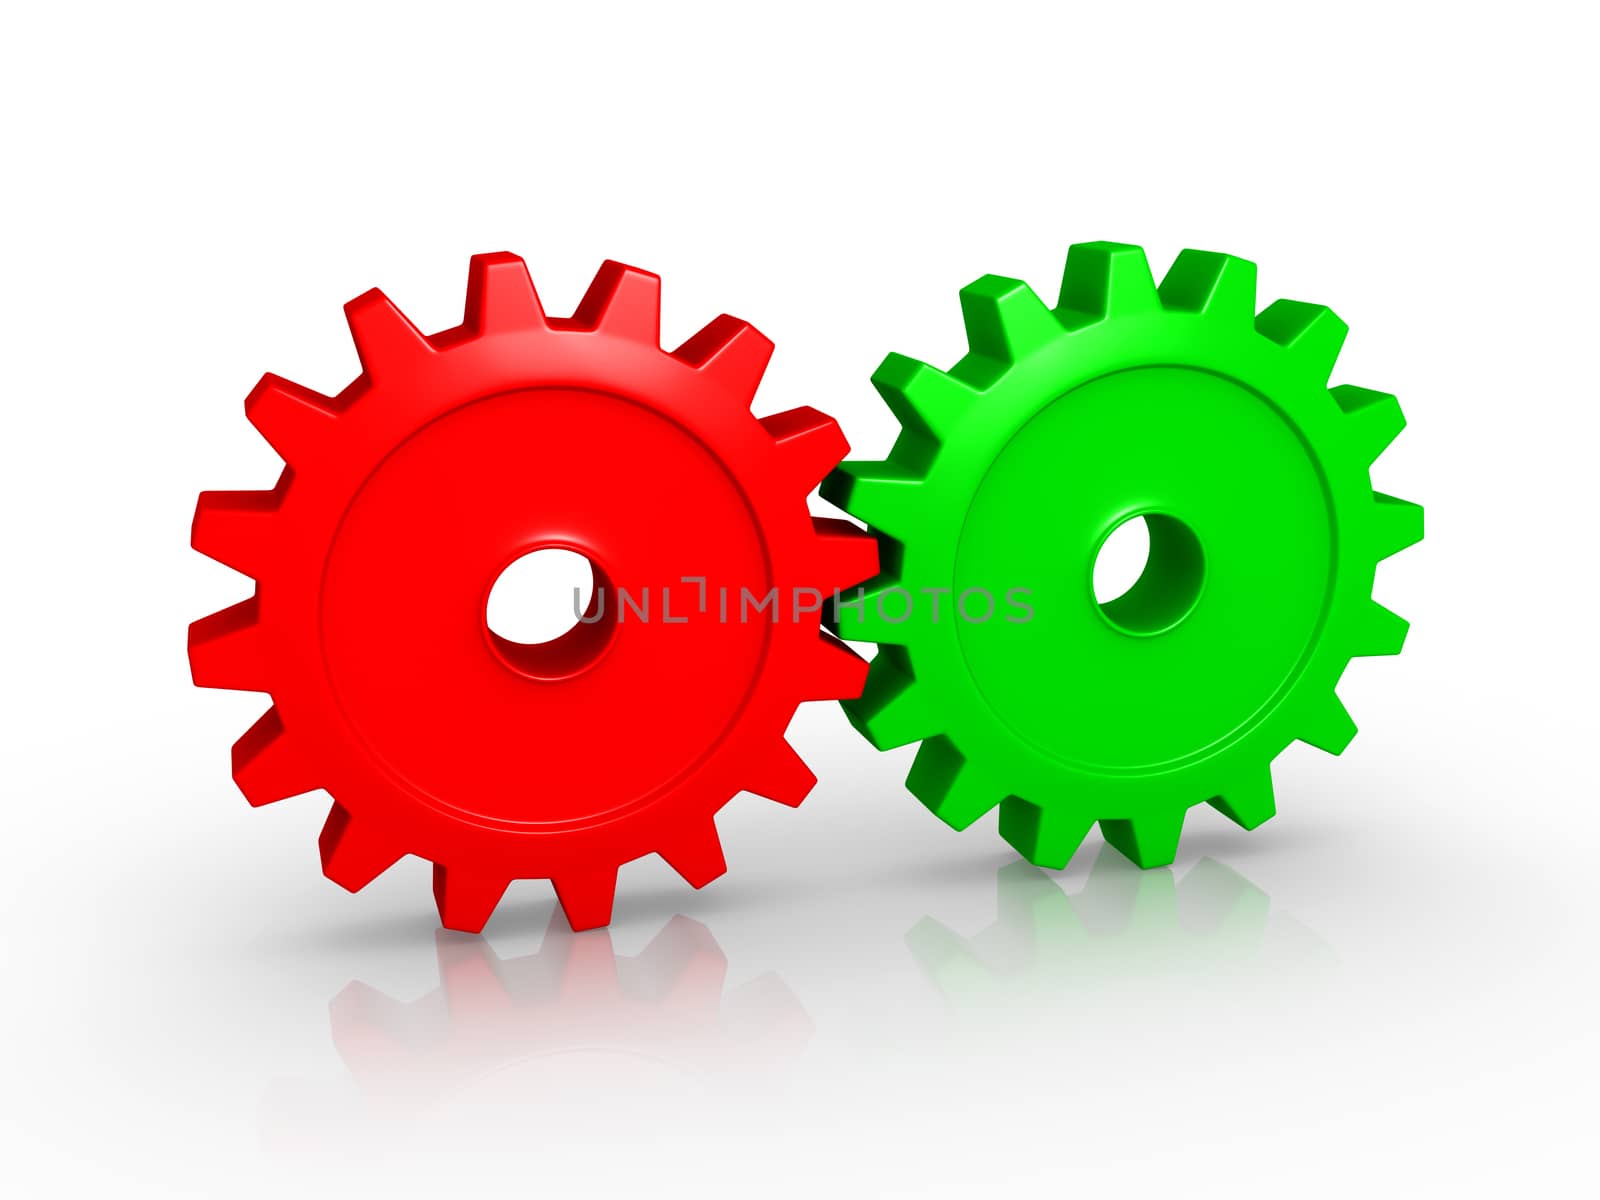 Two different colored 3d cogwheels are connected